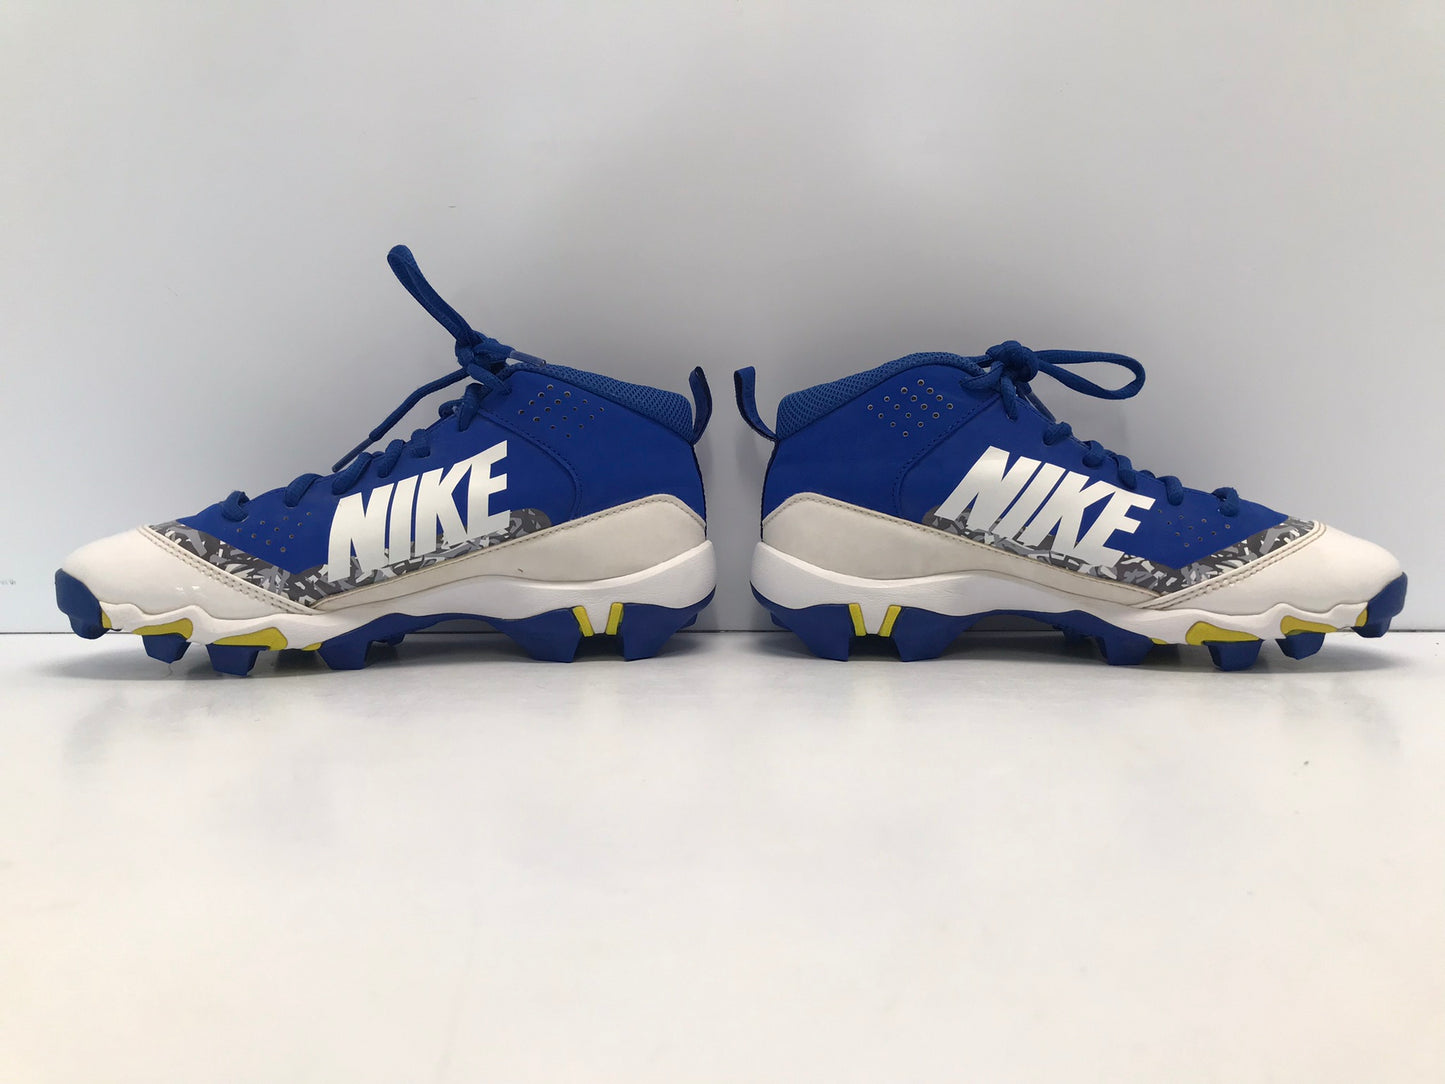 Baseball Shoes Cleats Child Size 3.5 Nike High Top Blue White Like New